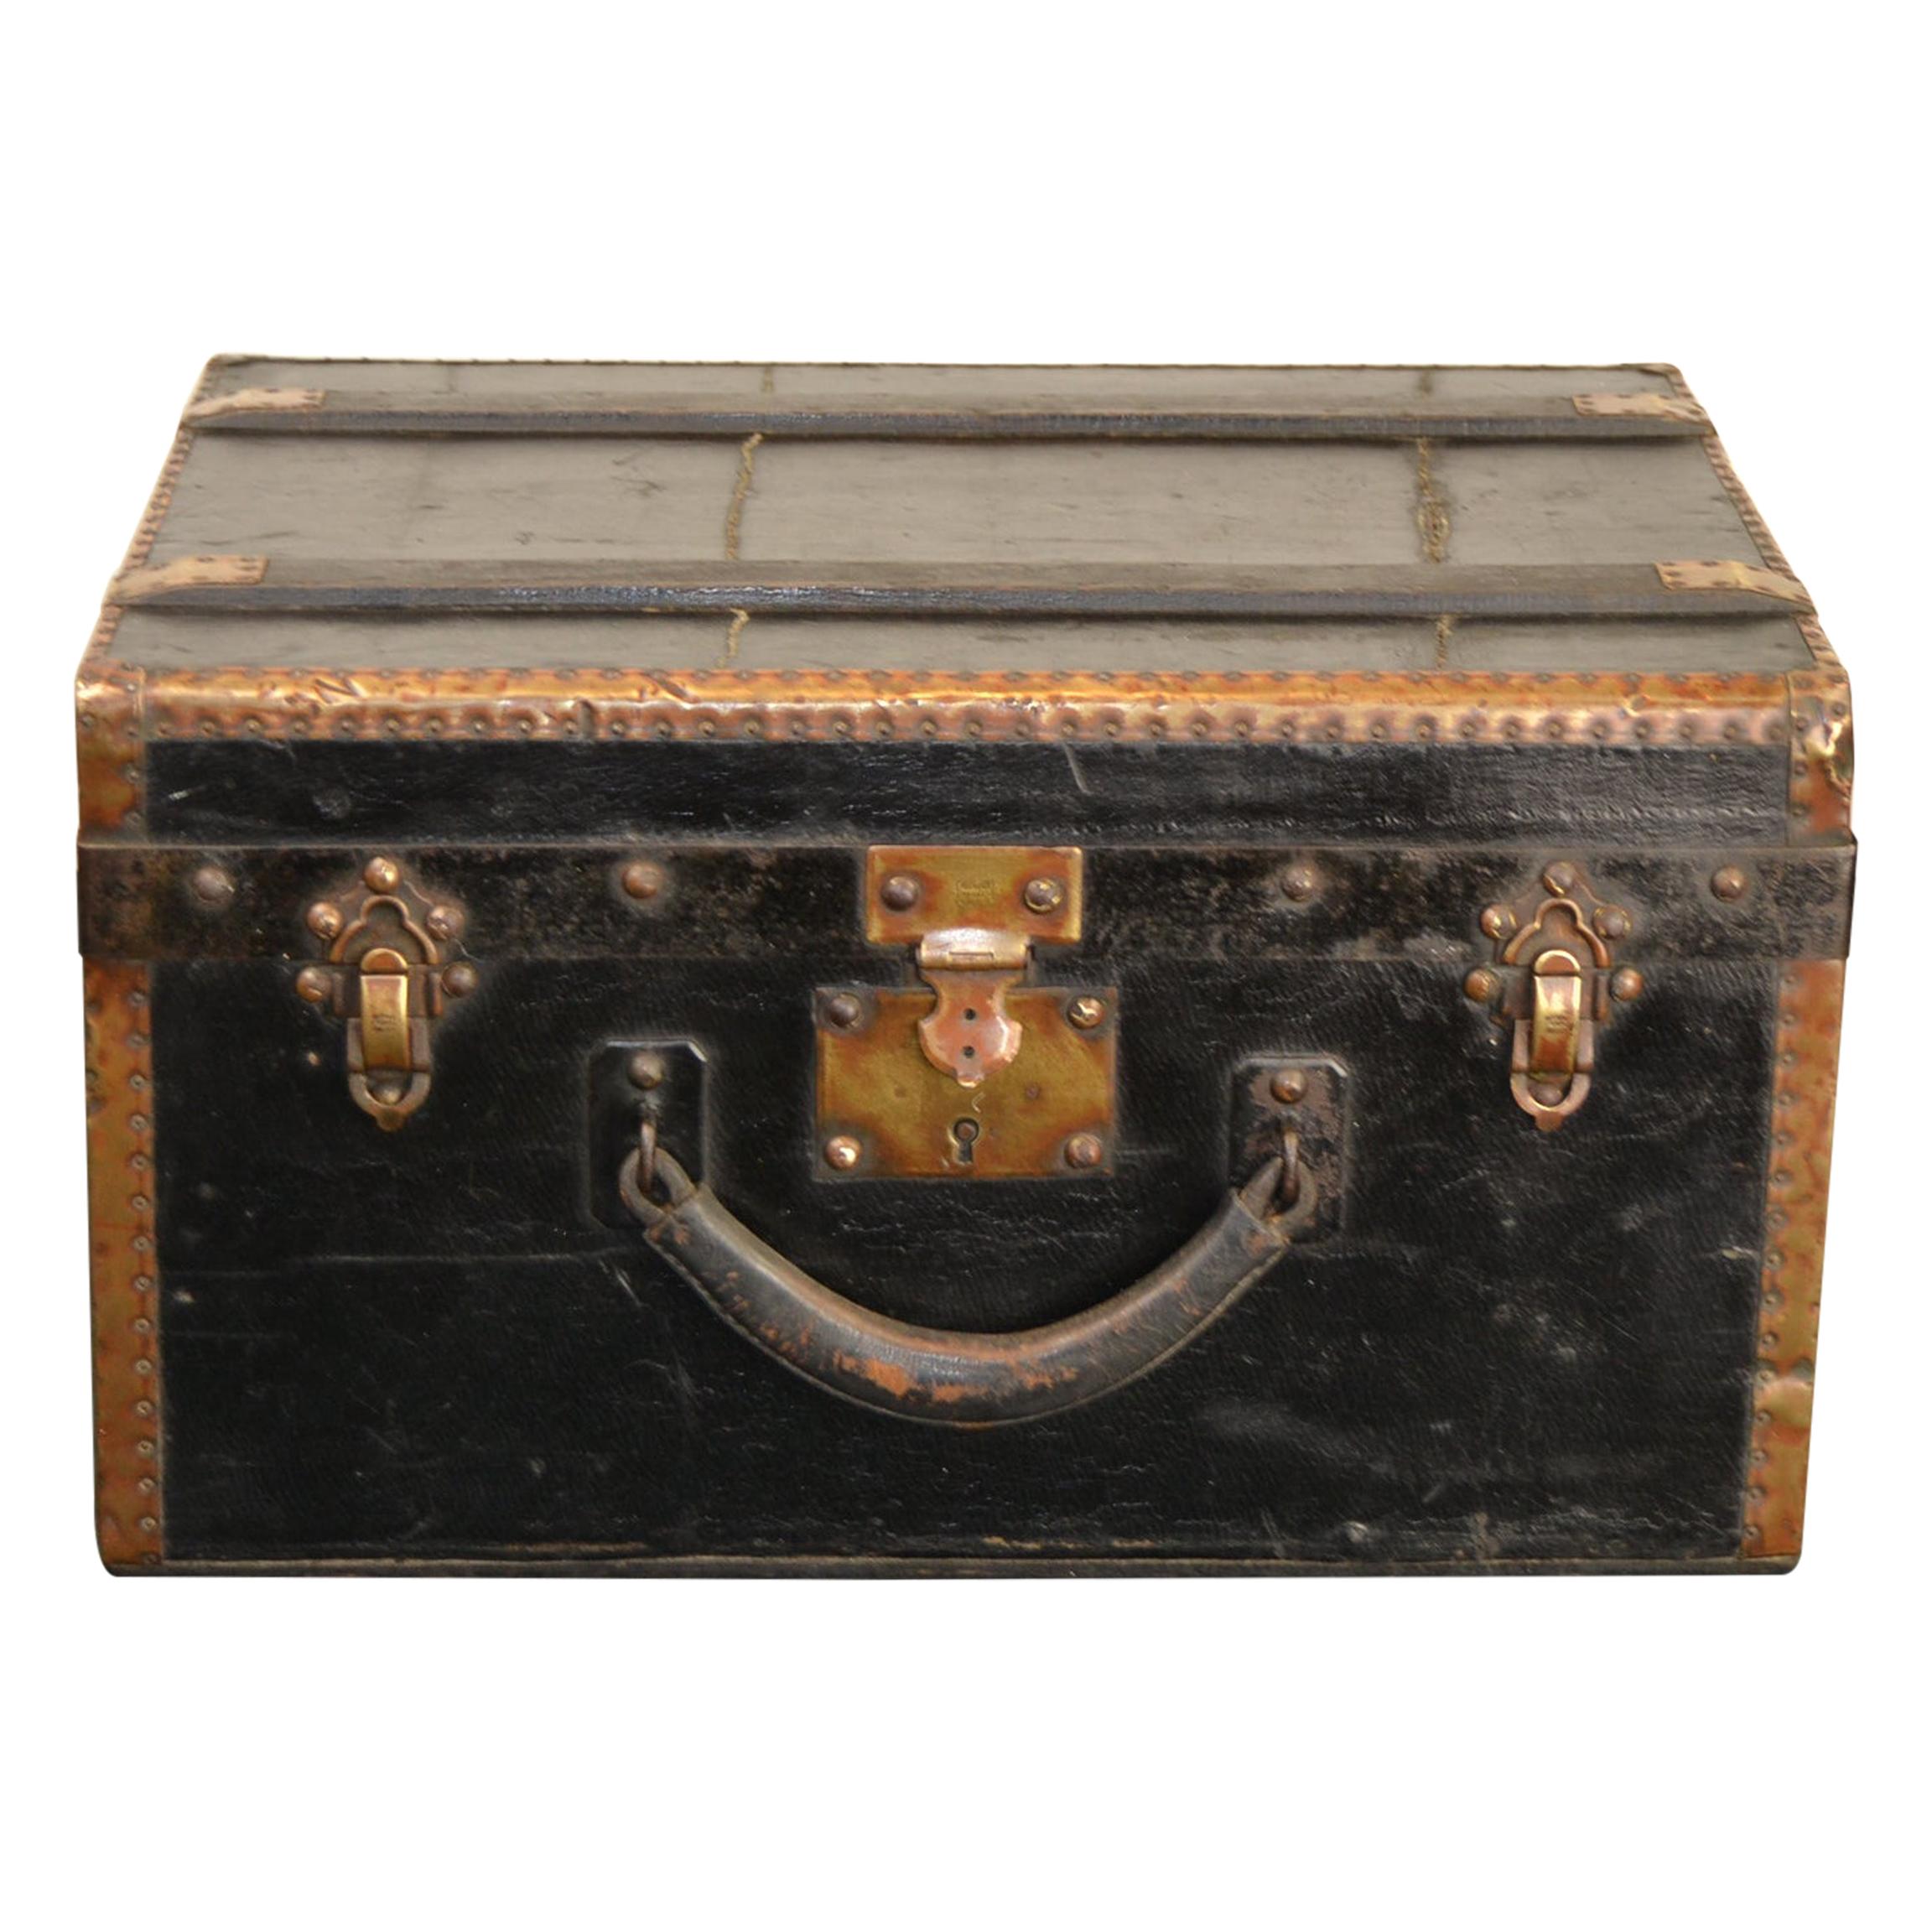 Antique Treasure Chest or Trunk by Au Touriste, France, Early 20th Century